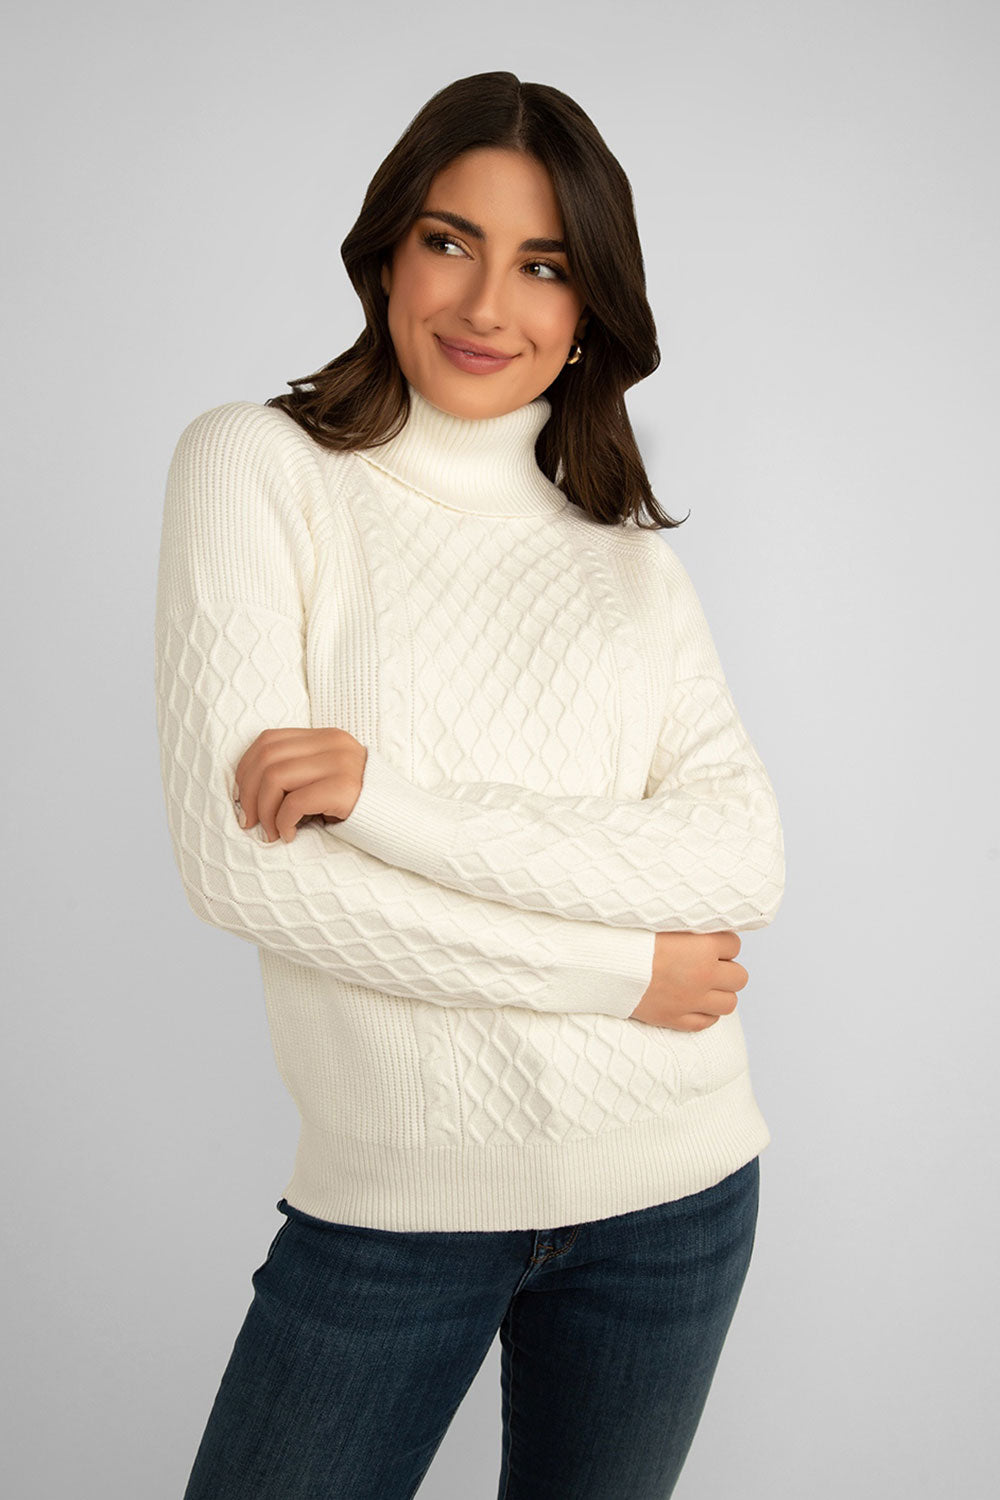 Women's Clothing ALISON SHERI (A42066) Cable Knit Turtleneck Sweater in OFFWHITE